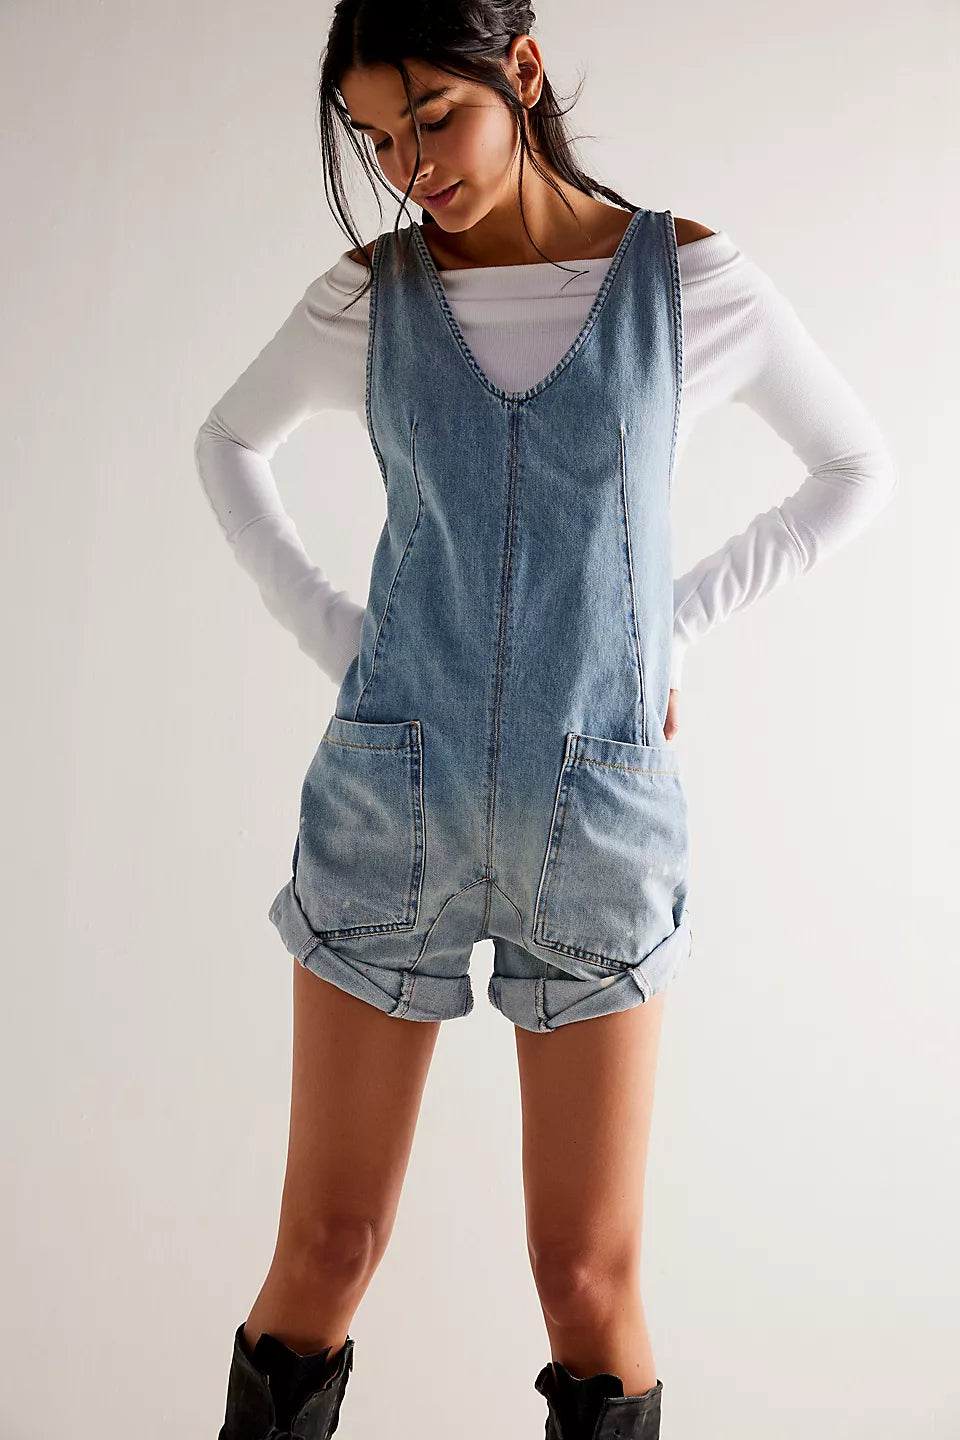 FREE PEOPLE-"HIGH ROLLER" SHORTALL